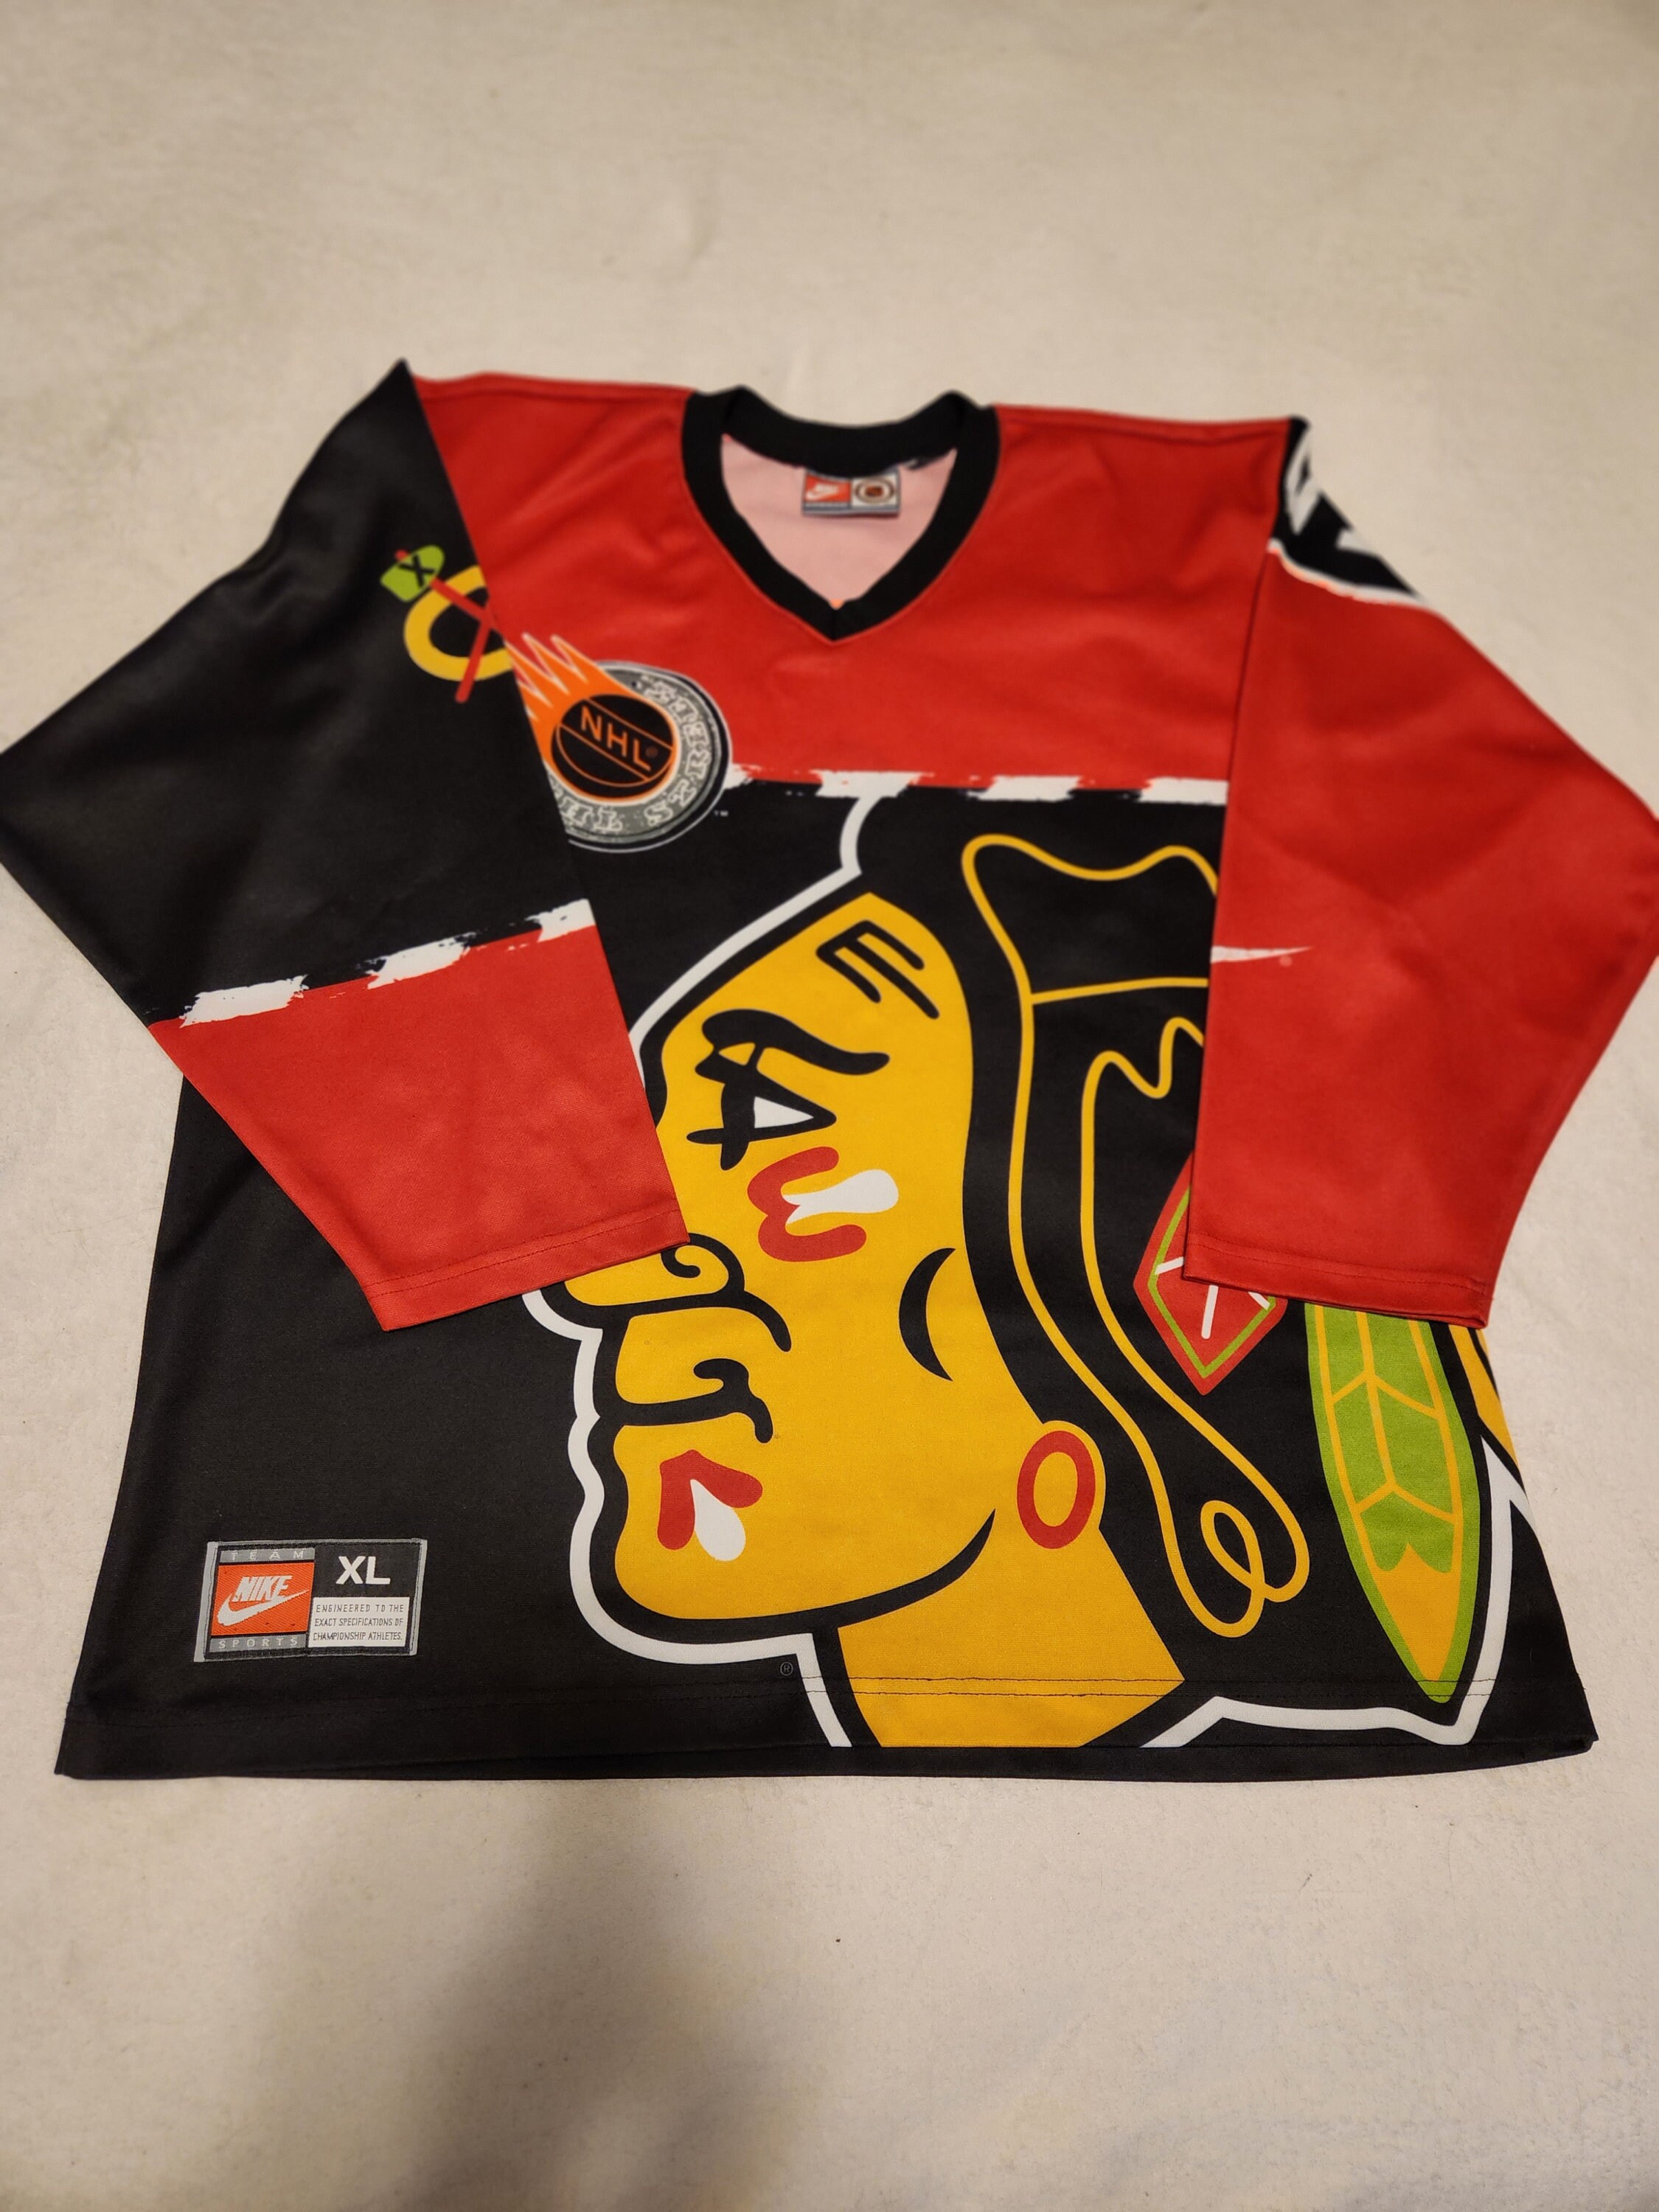 Got this Nike NHL Street Wings jersey today, I love it, but I want